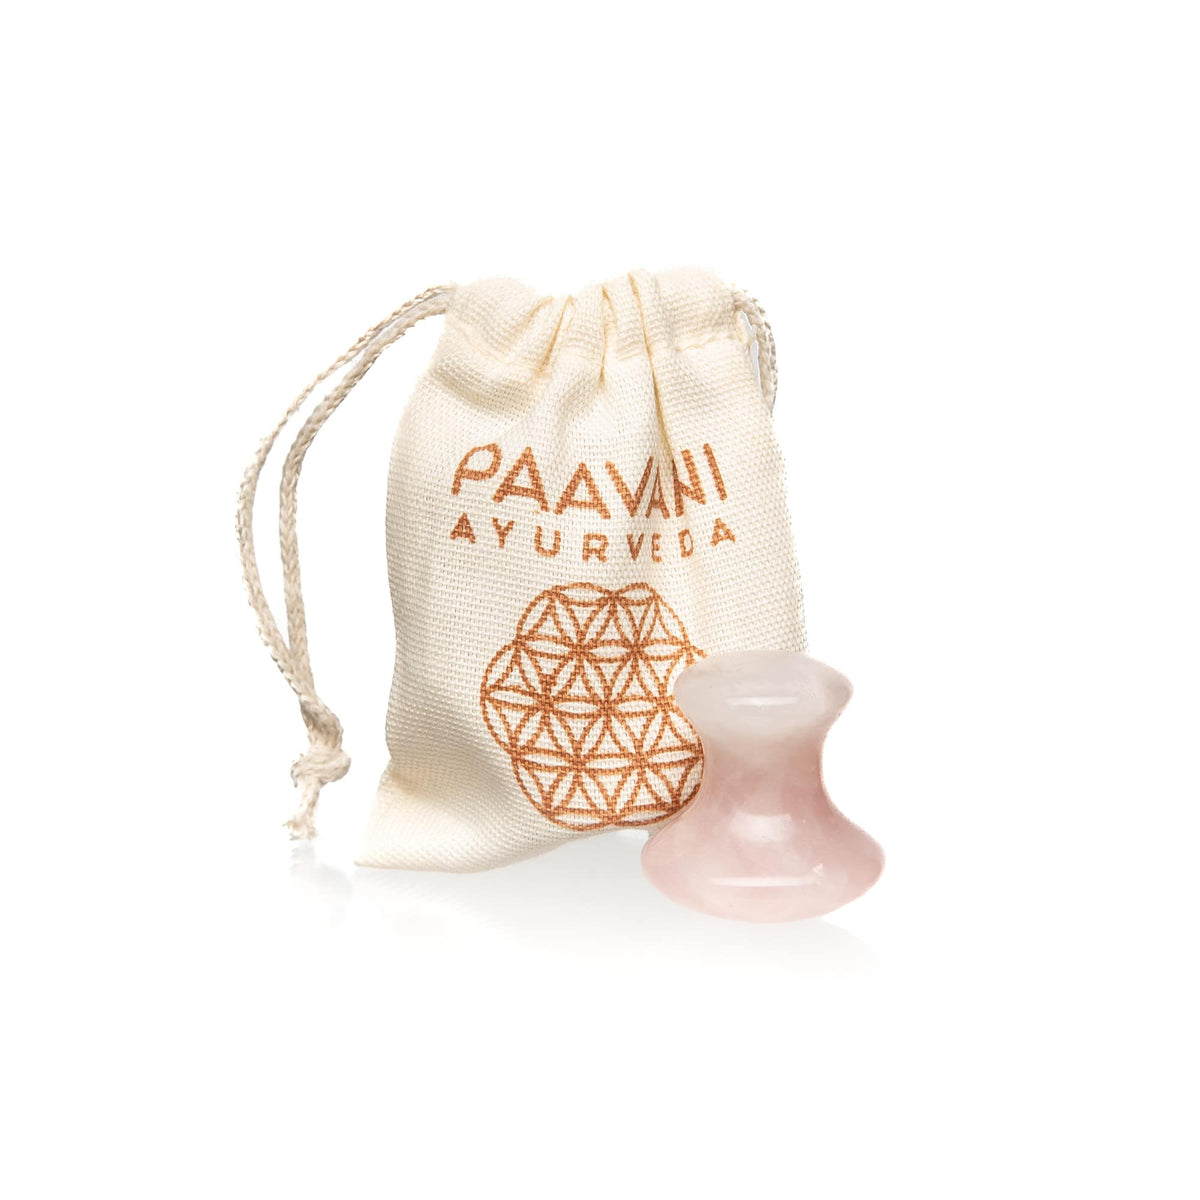 Paavani Ayurveda - Rose Quartz Facial Tool, Hand-Carved and Polished Massage Tool, Face and Eye